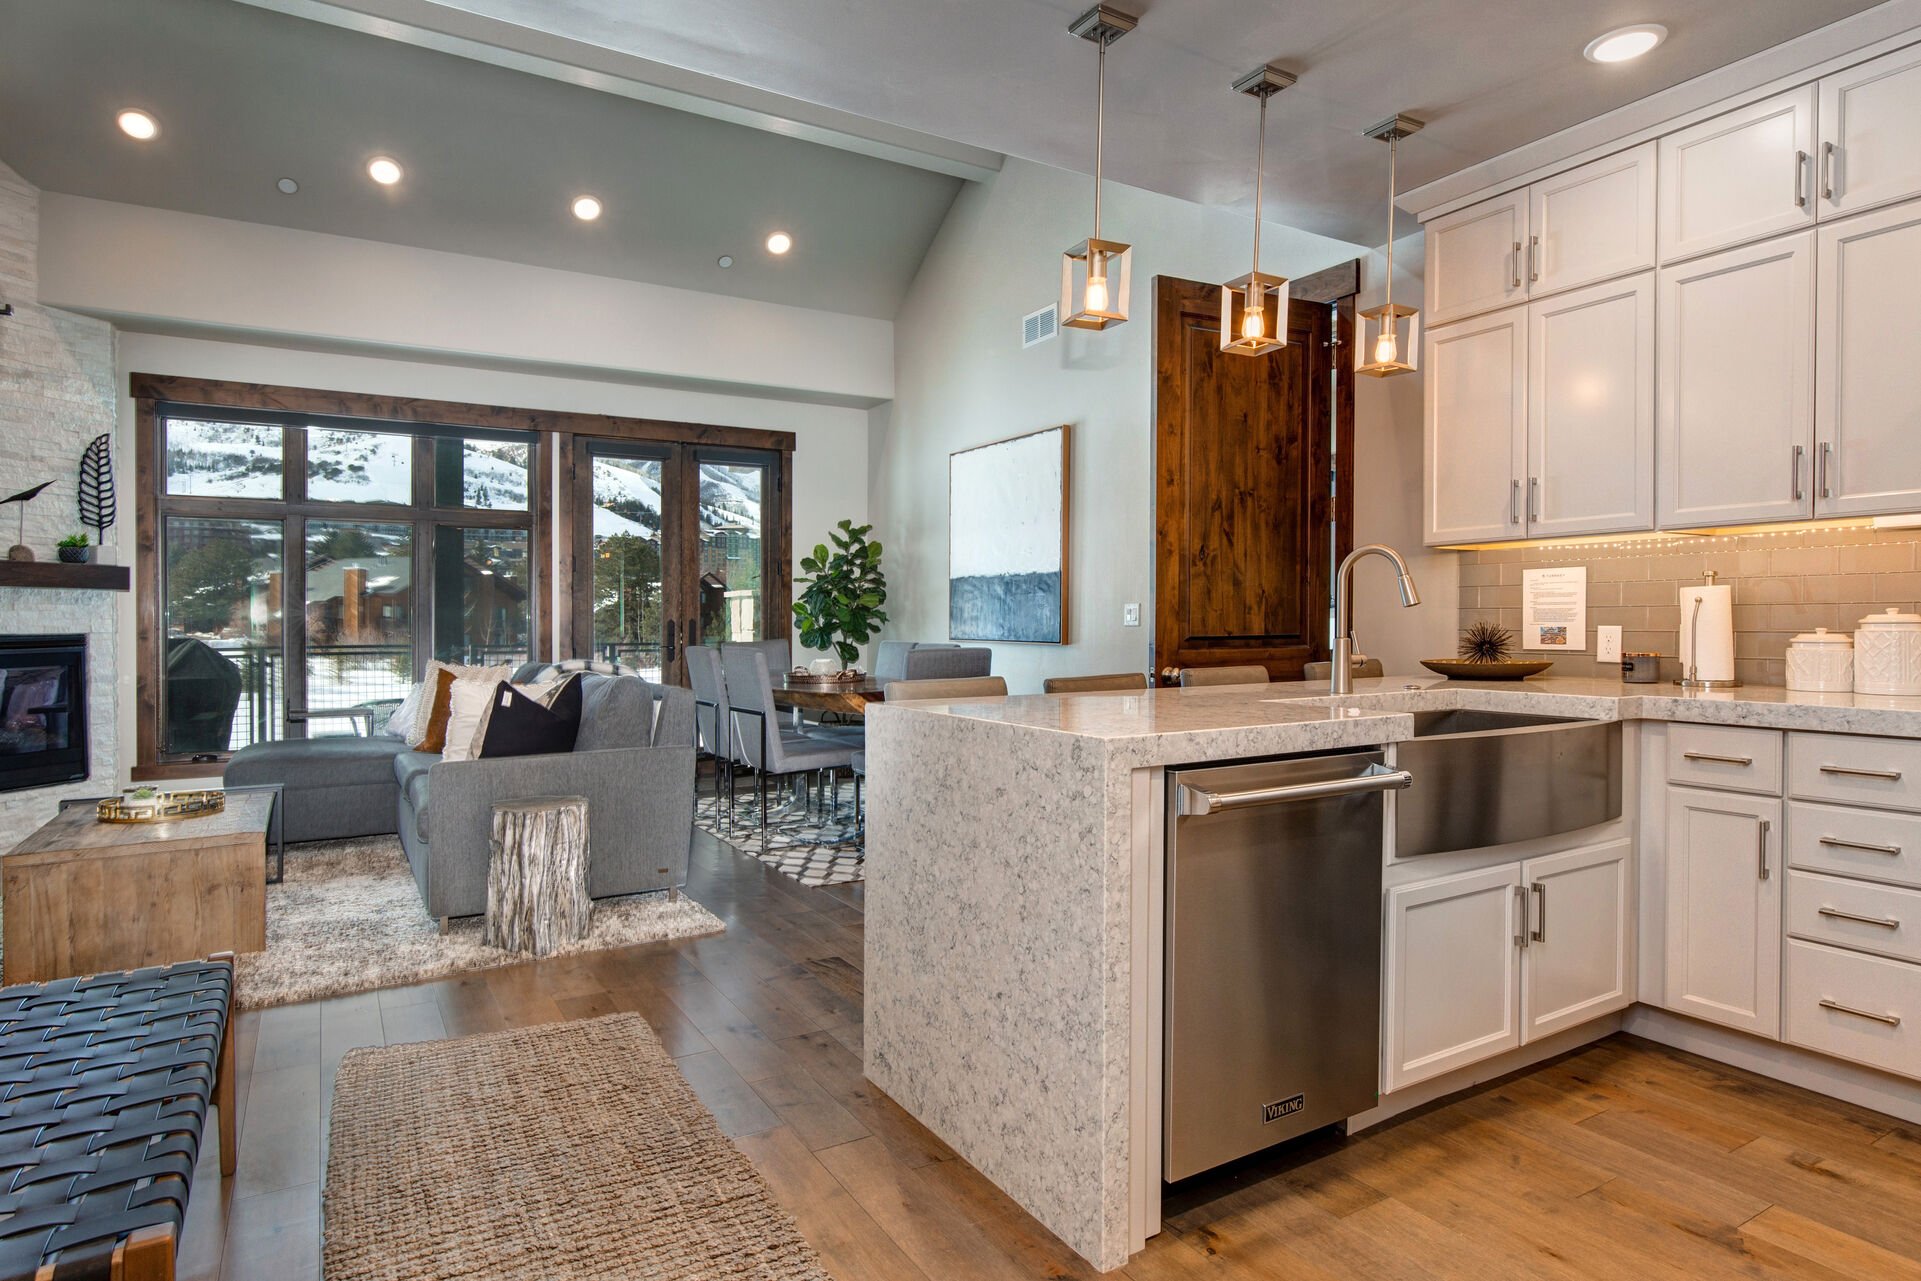 Fully Equipped Gourmet Kitchen with opulent stone countertops, stainless steel Viking appliances, and bar seating for four